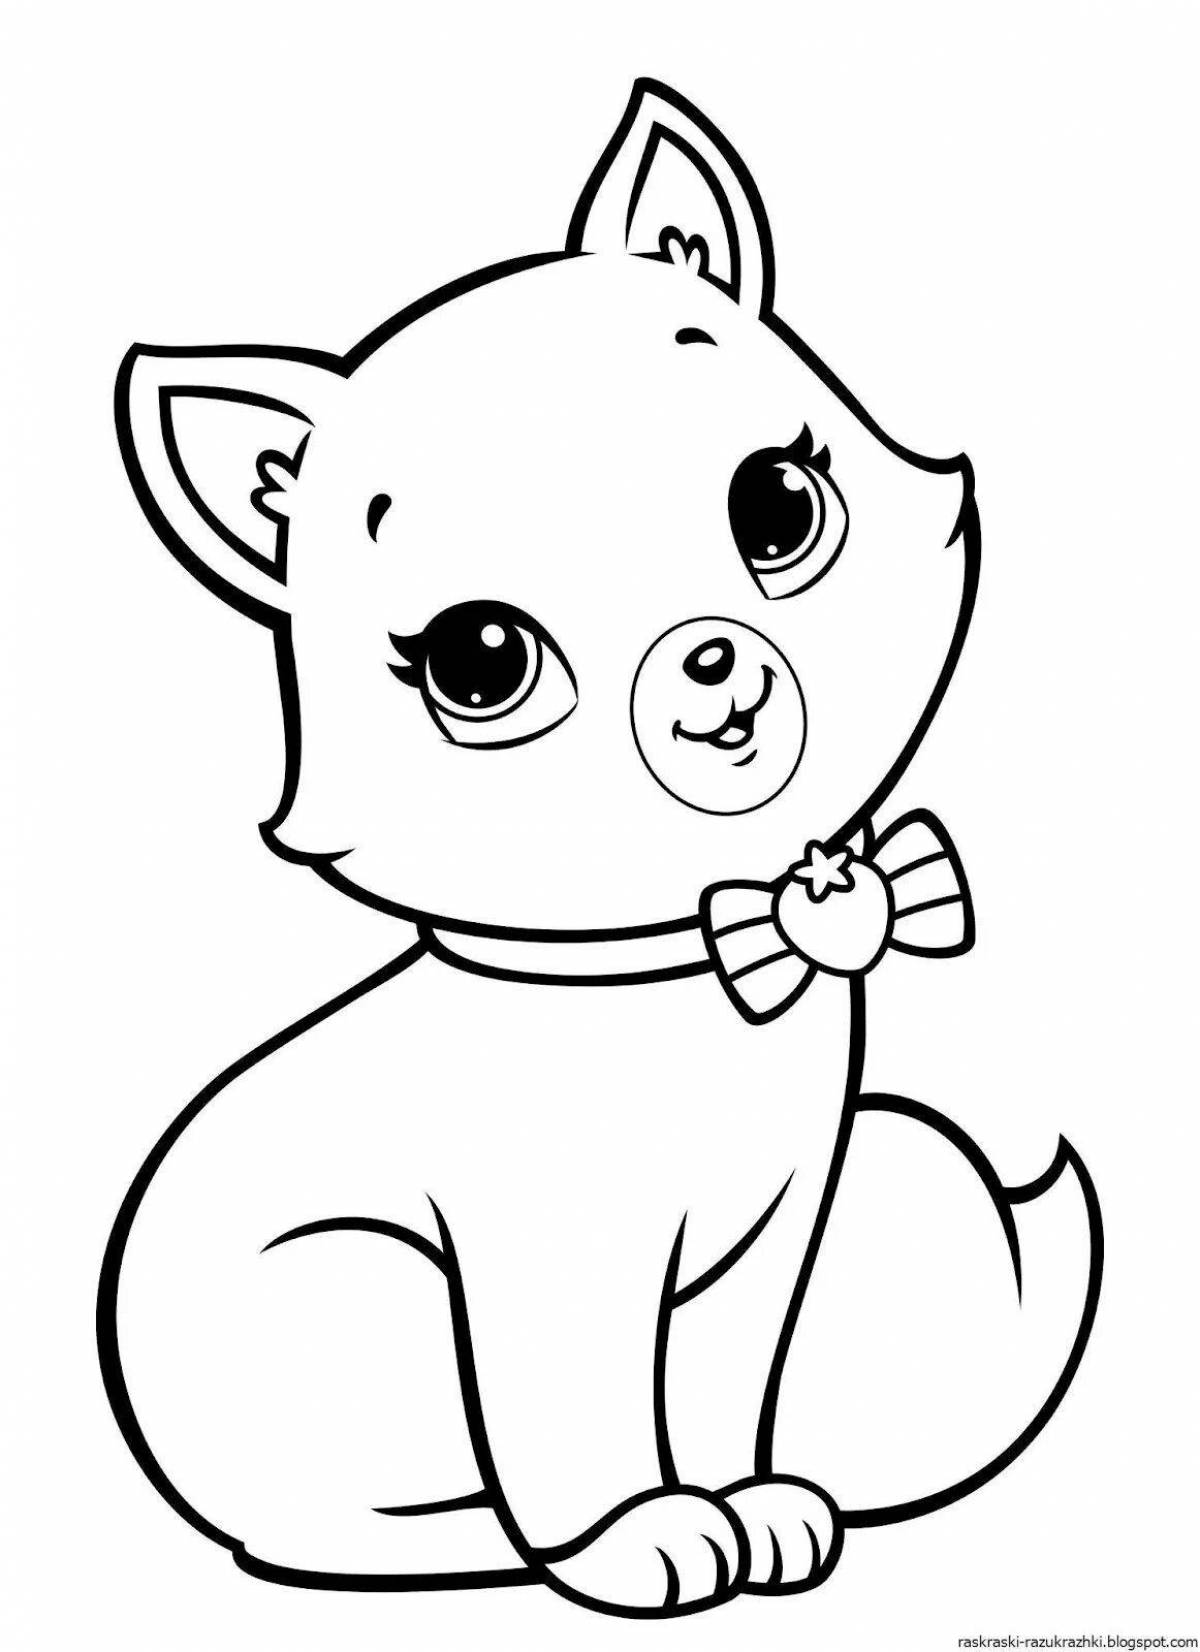 Adorable cute coloring book for kids